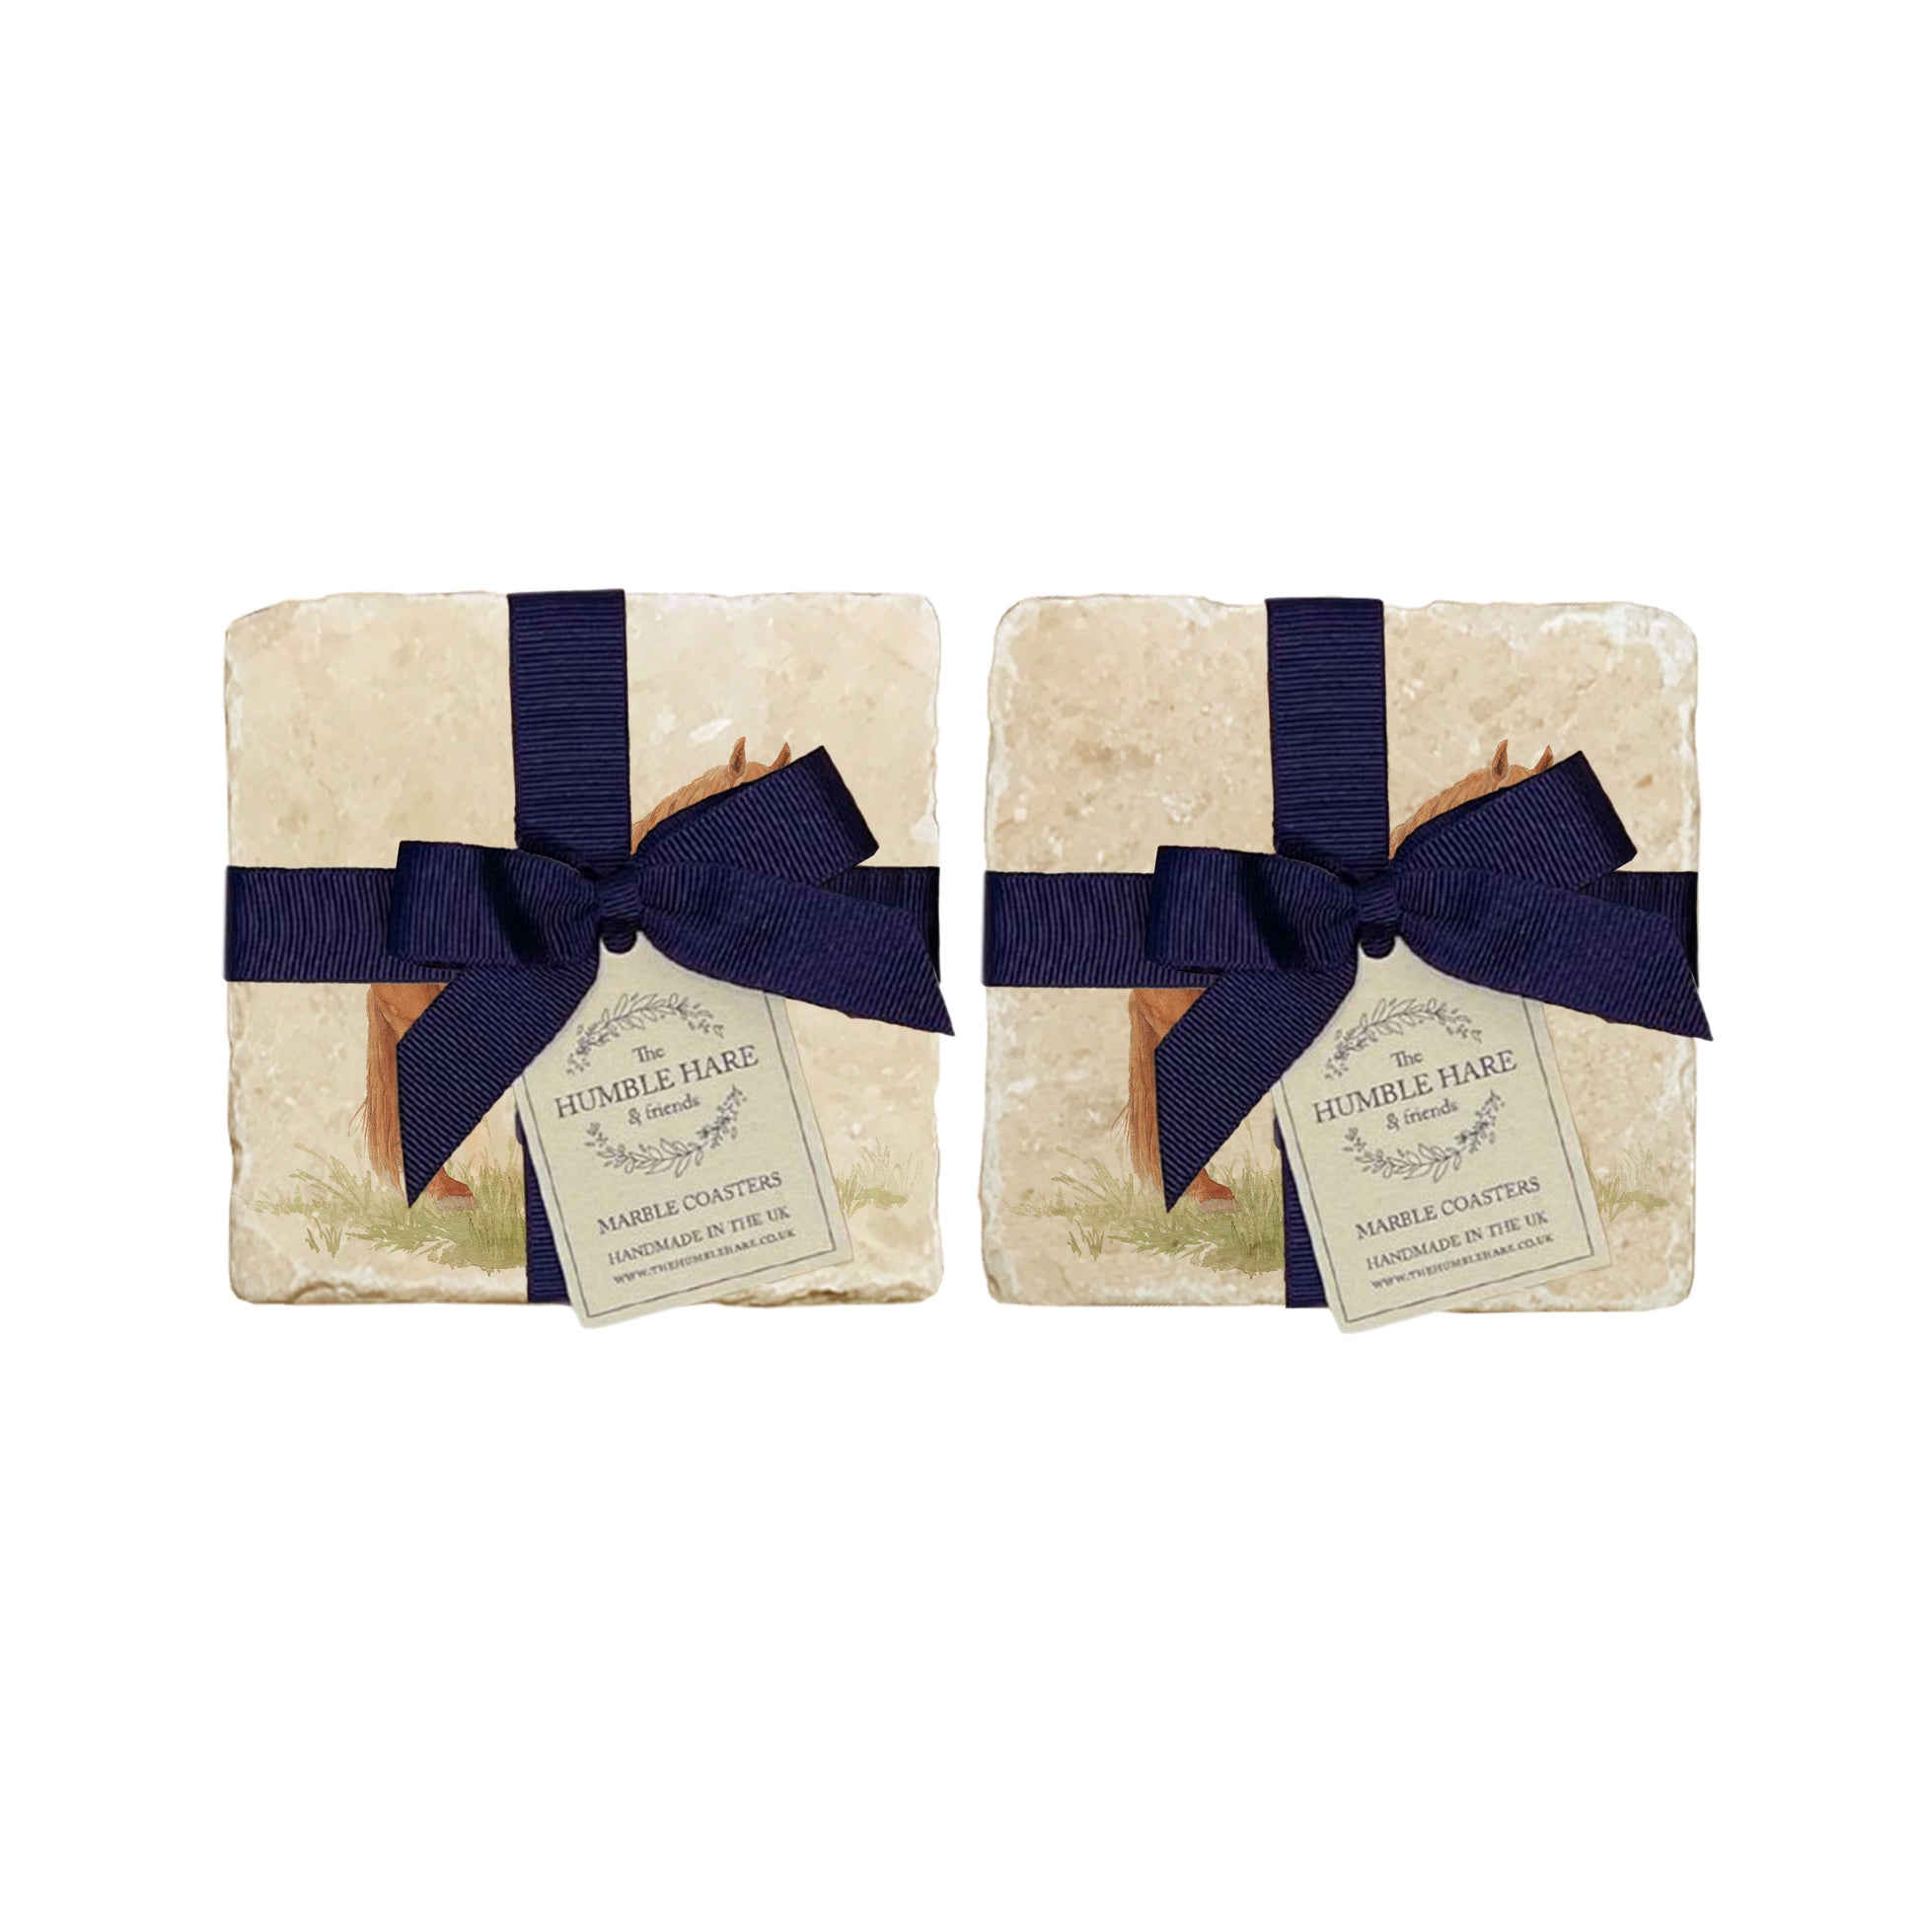 A set of 4 handmade marble coasters featuring a watercolour Suffolk Punch horse design, packaged in 2 pairs, with a luxurious blue bow and gift tag.